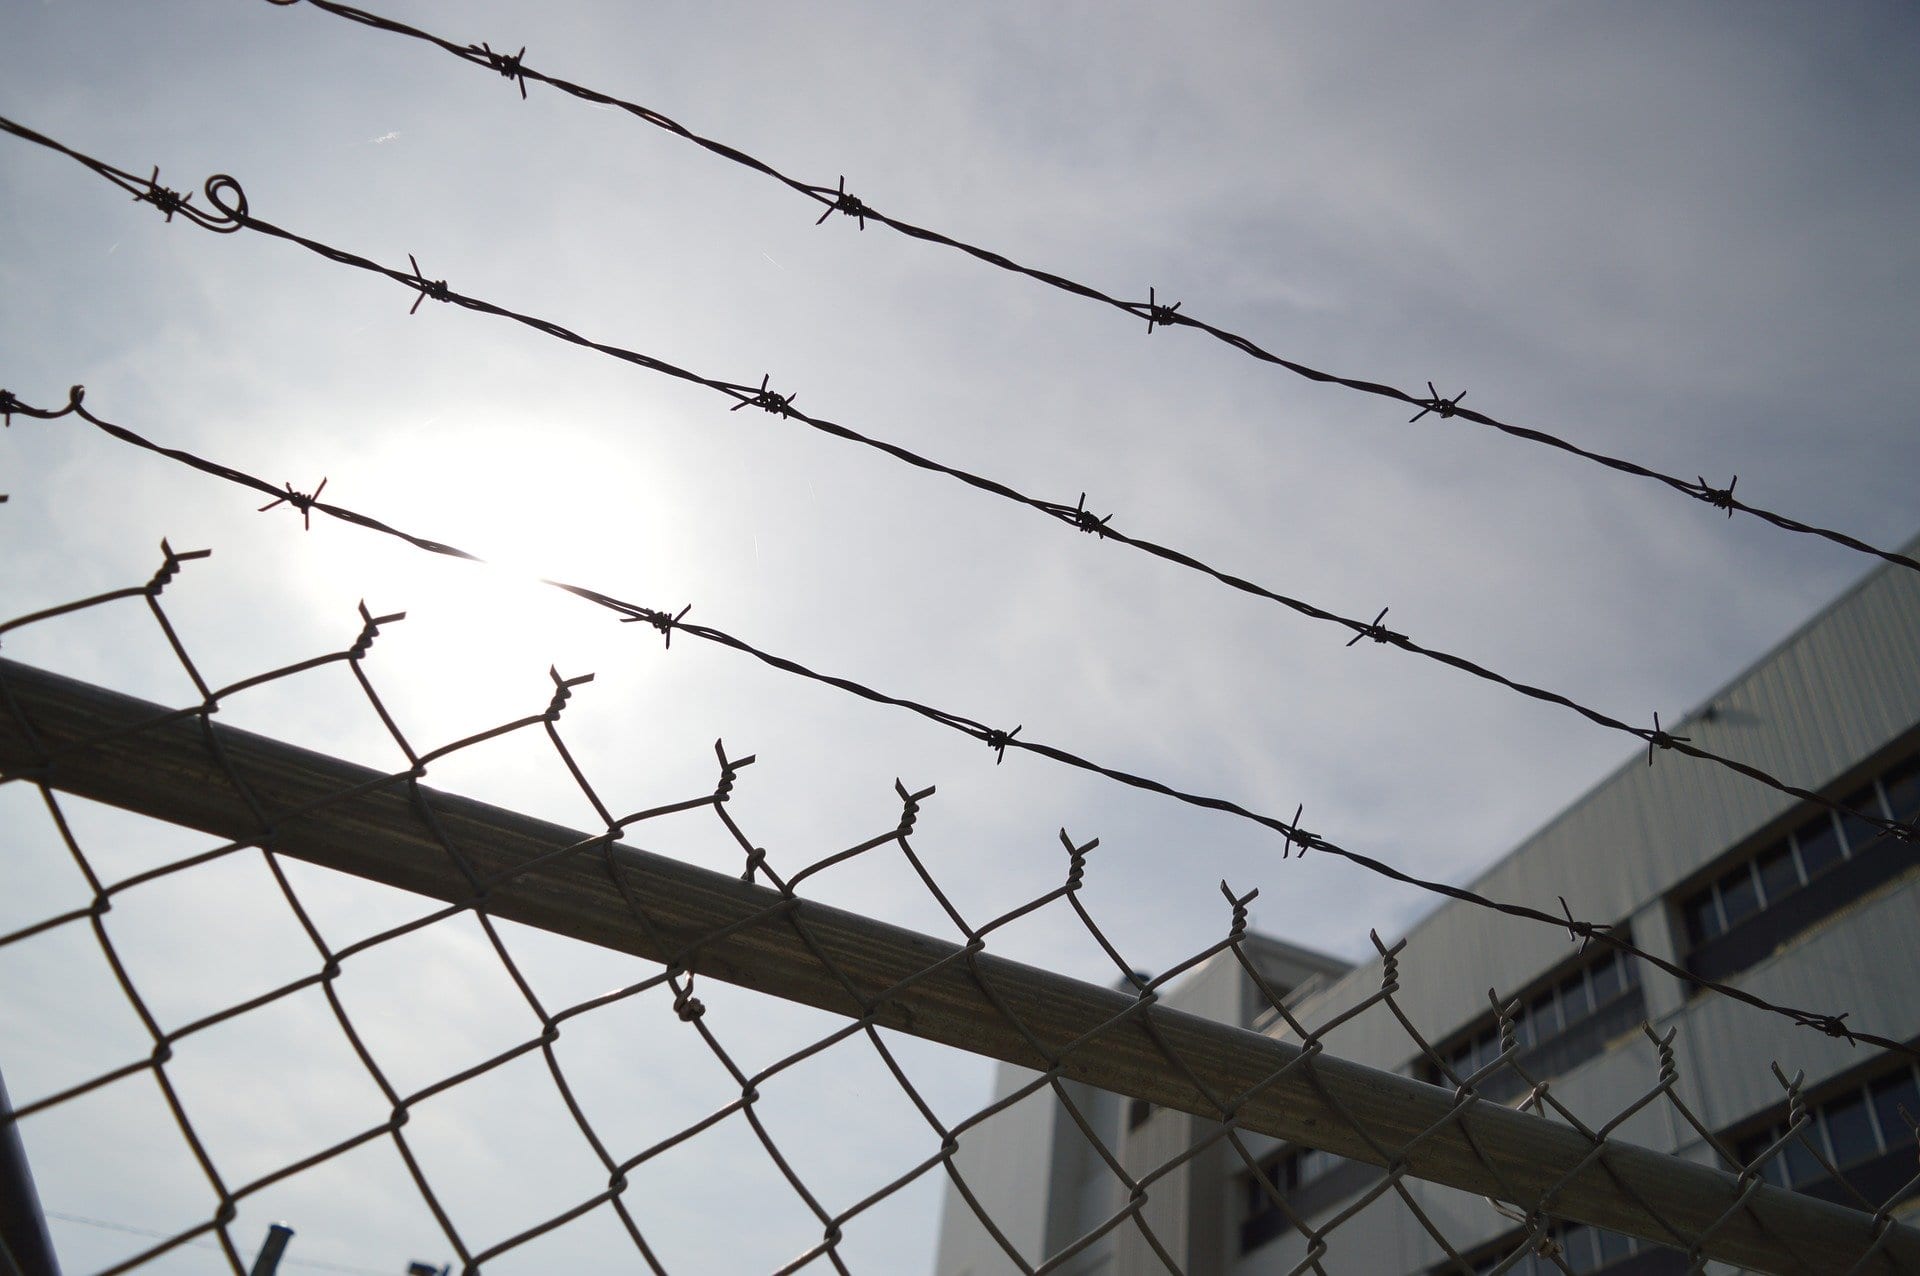 The Policy of Internment and Unlawful Detention Claims Explained